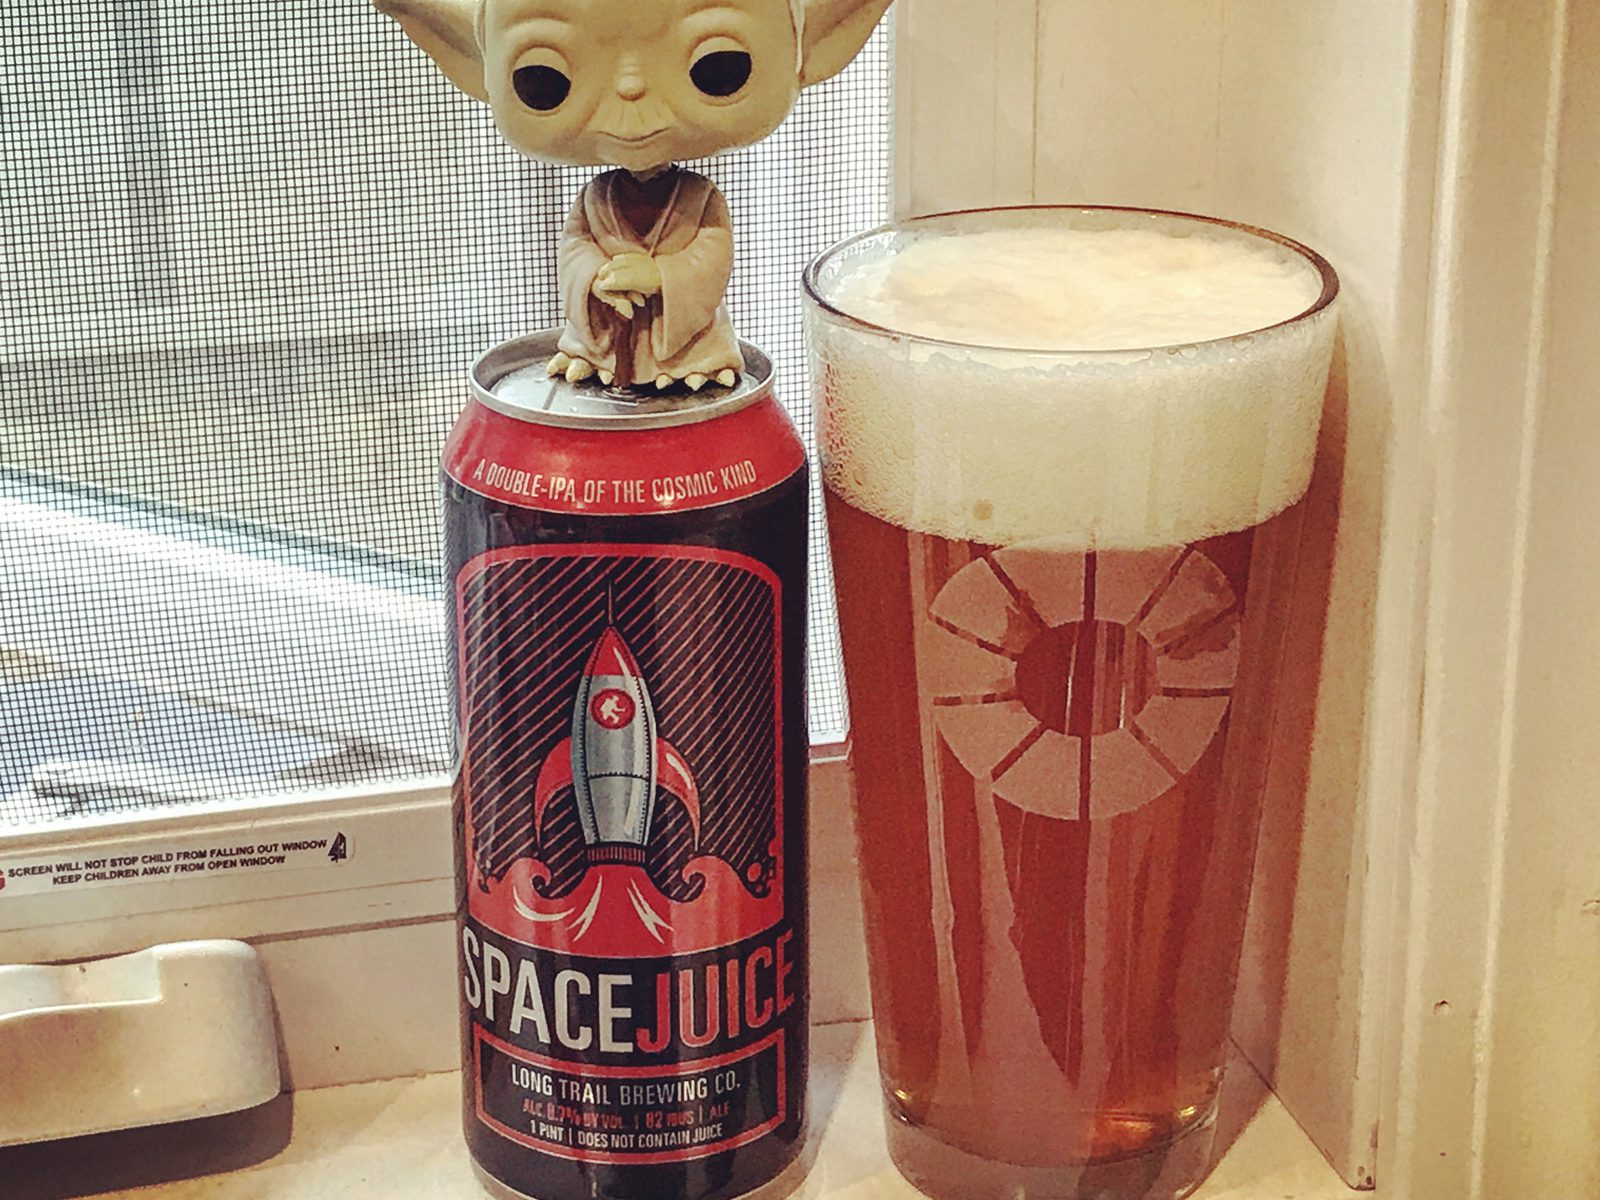 Long Trail Brewing Company: Space Juice